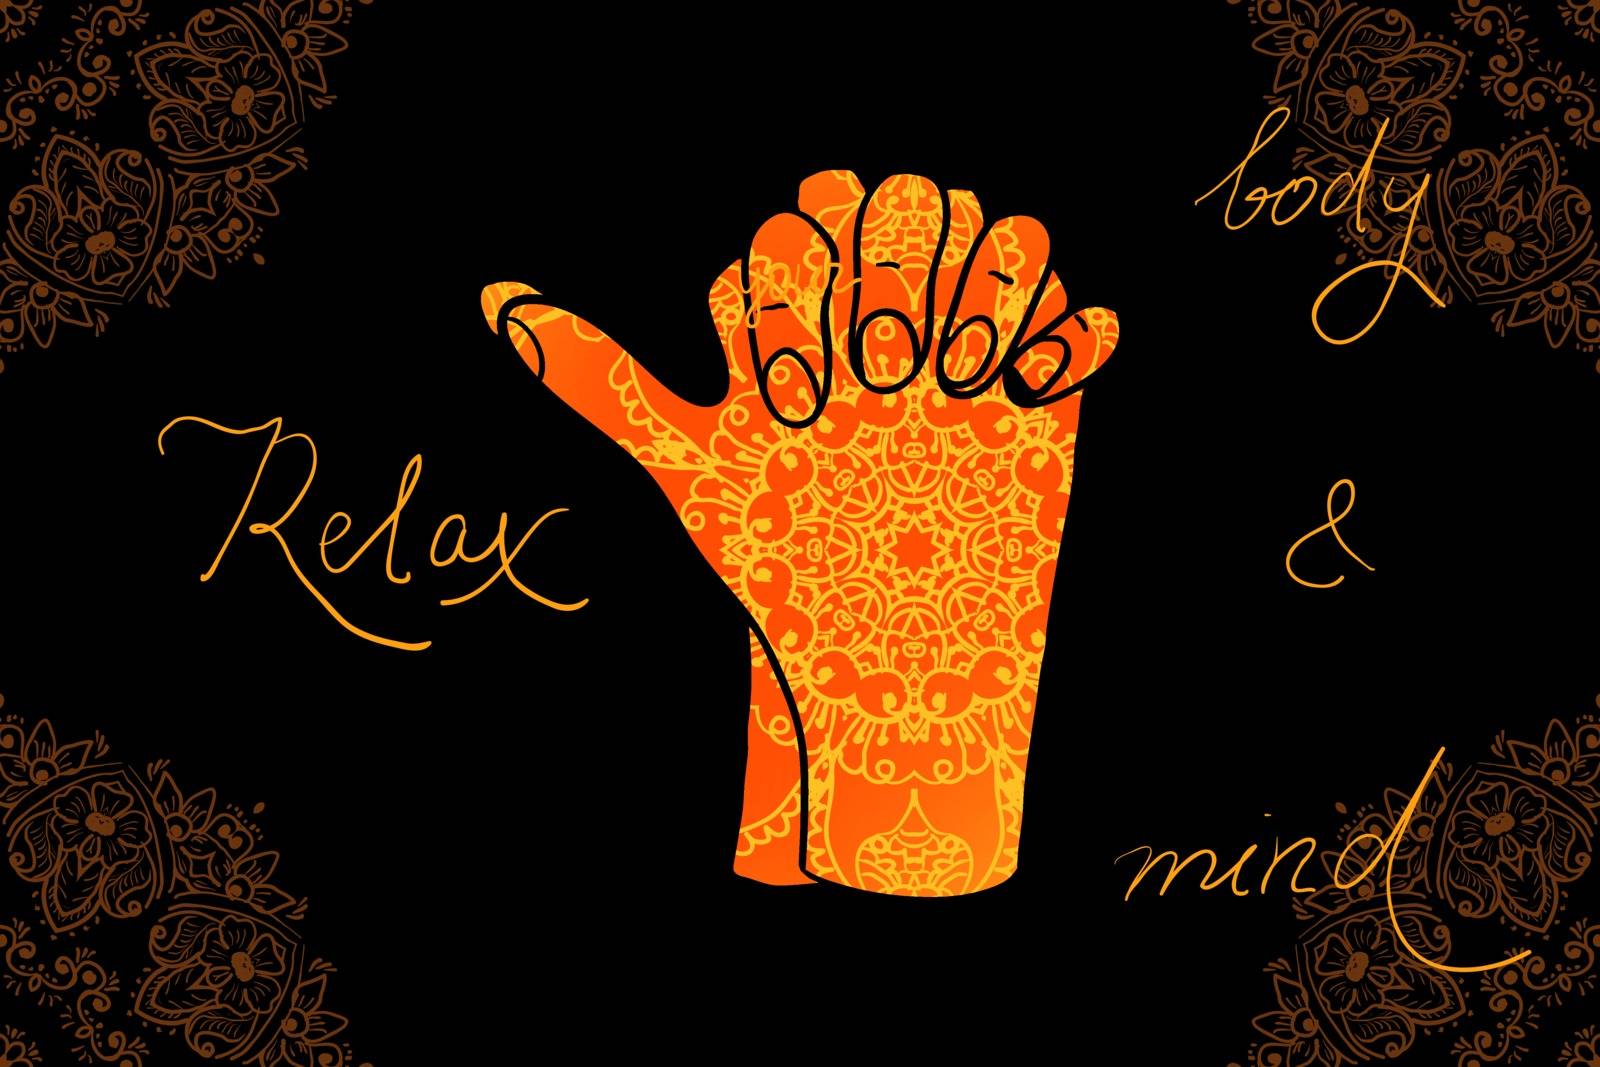 Element yoga Turtle mudra hands with mehendi patterns. Vector illustration for a yoga studio, tattoo, spa, postcards, souvenirs. 